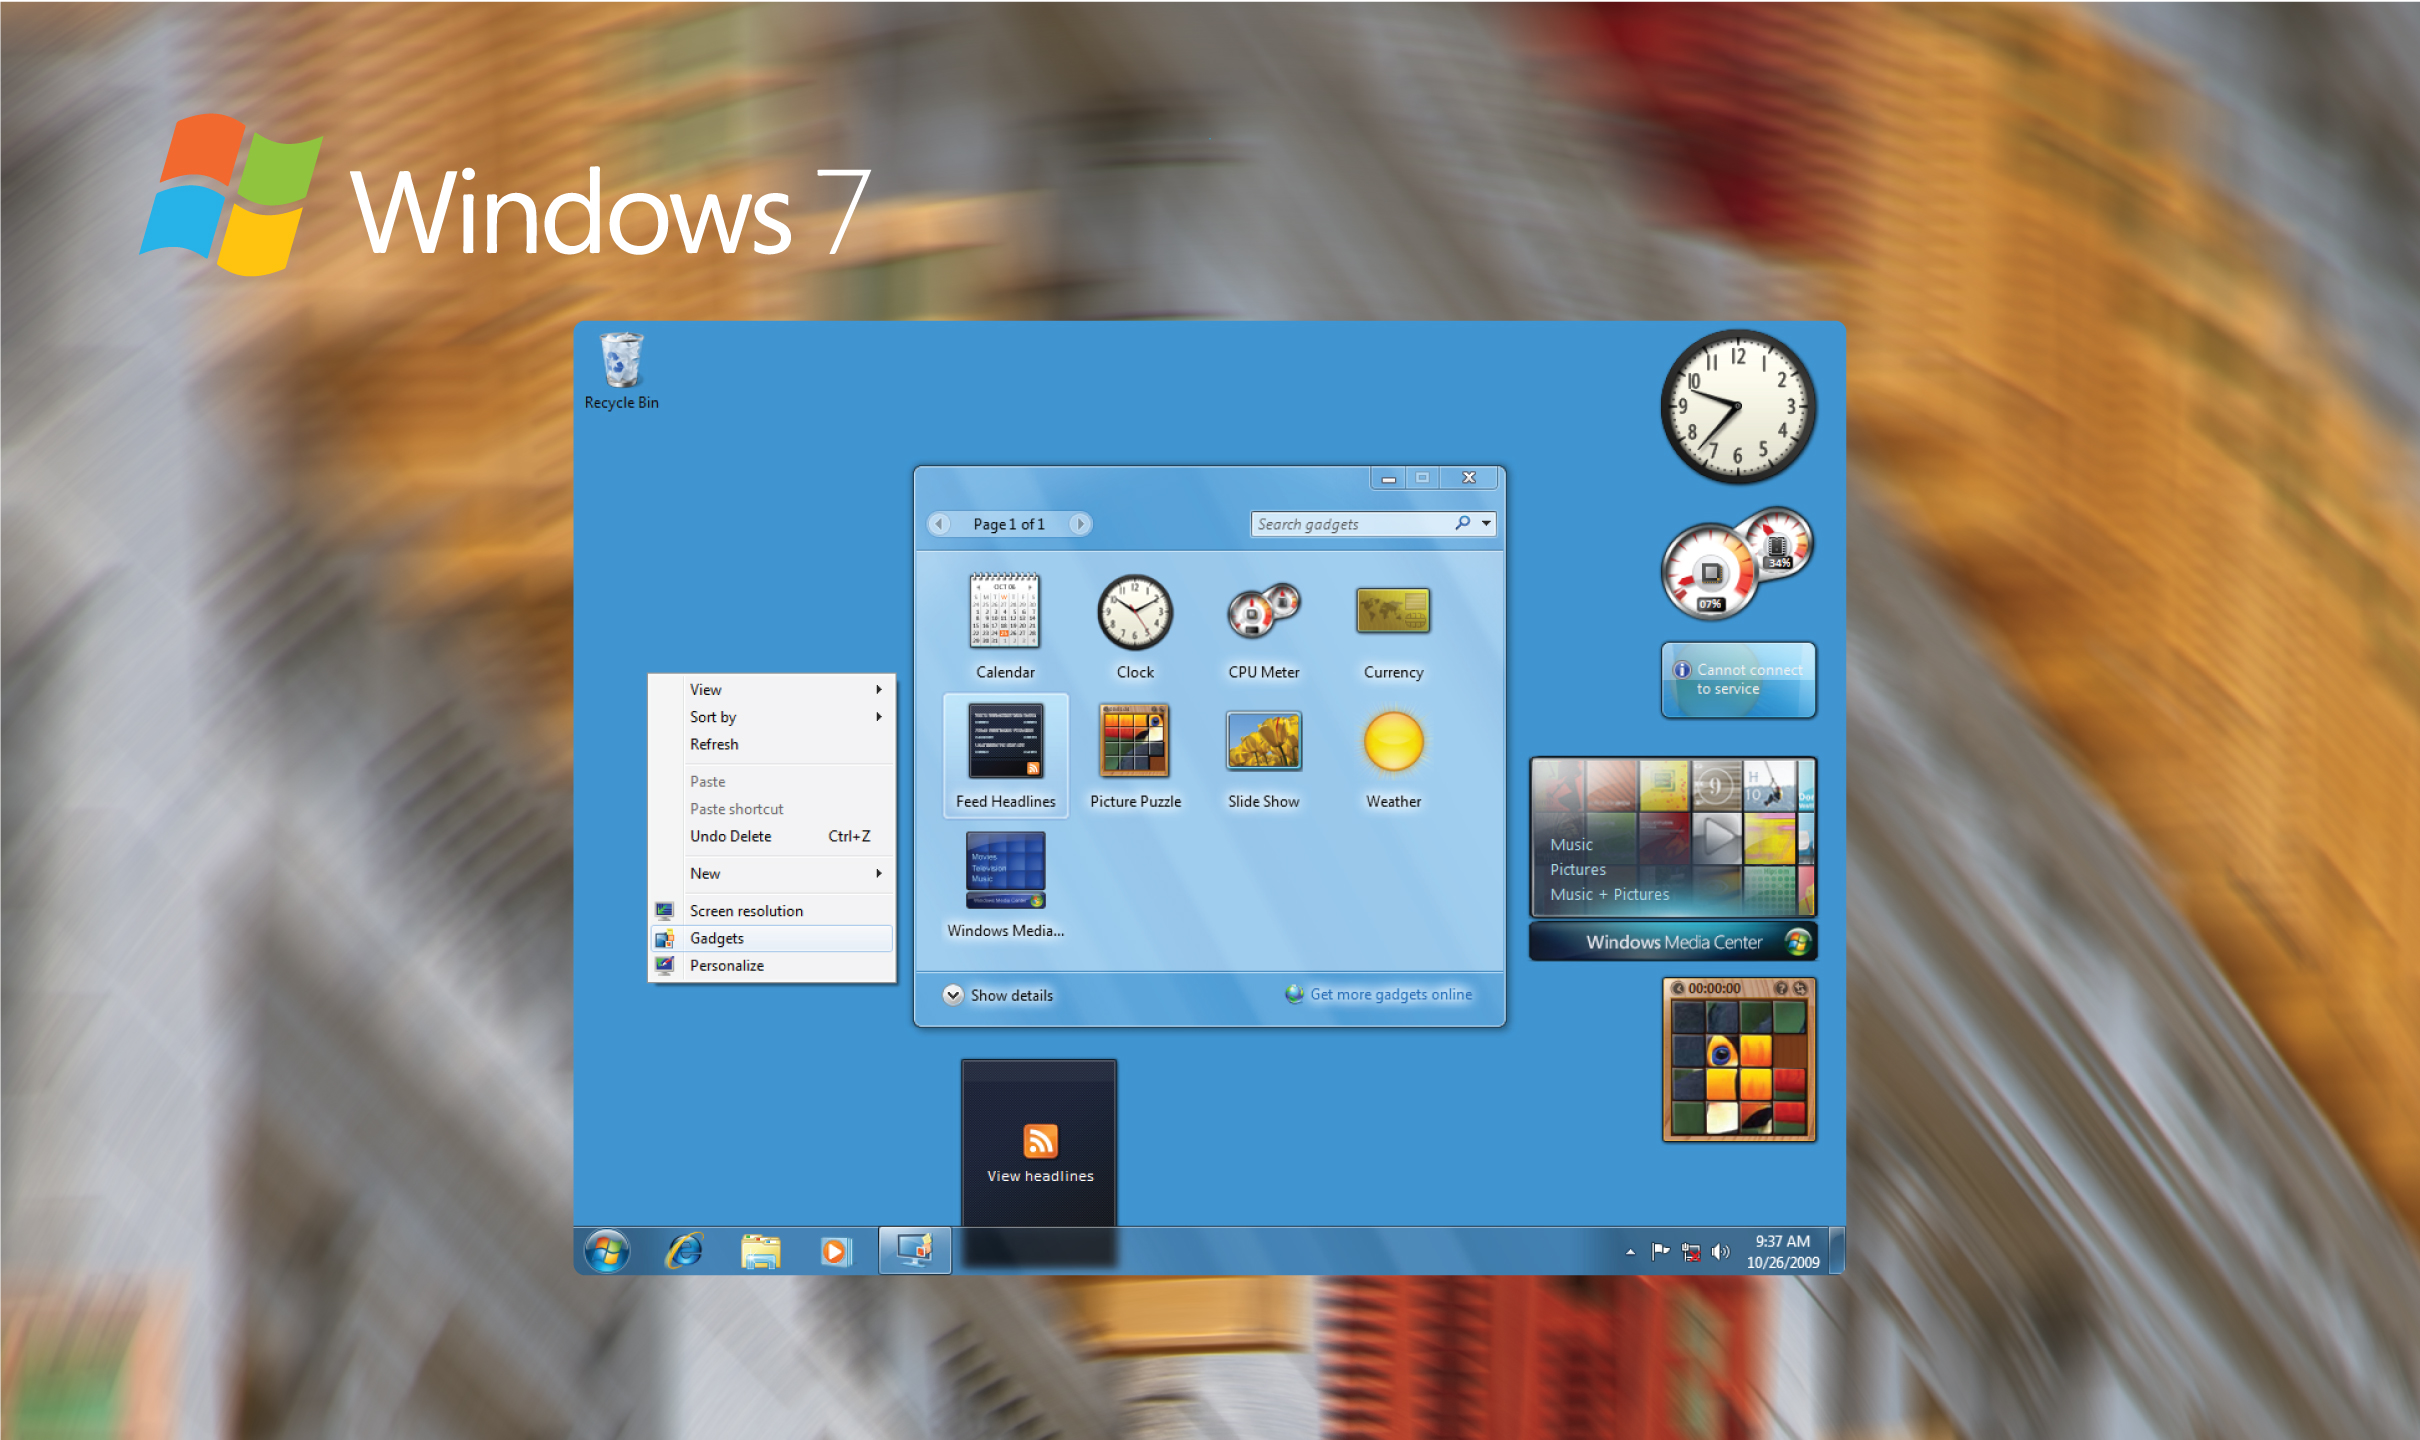 microsoft windows 7 ultimate download without key